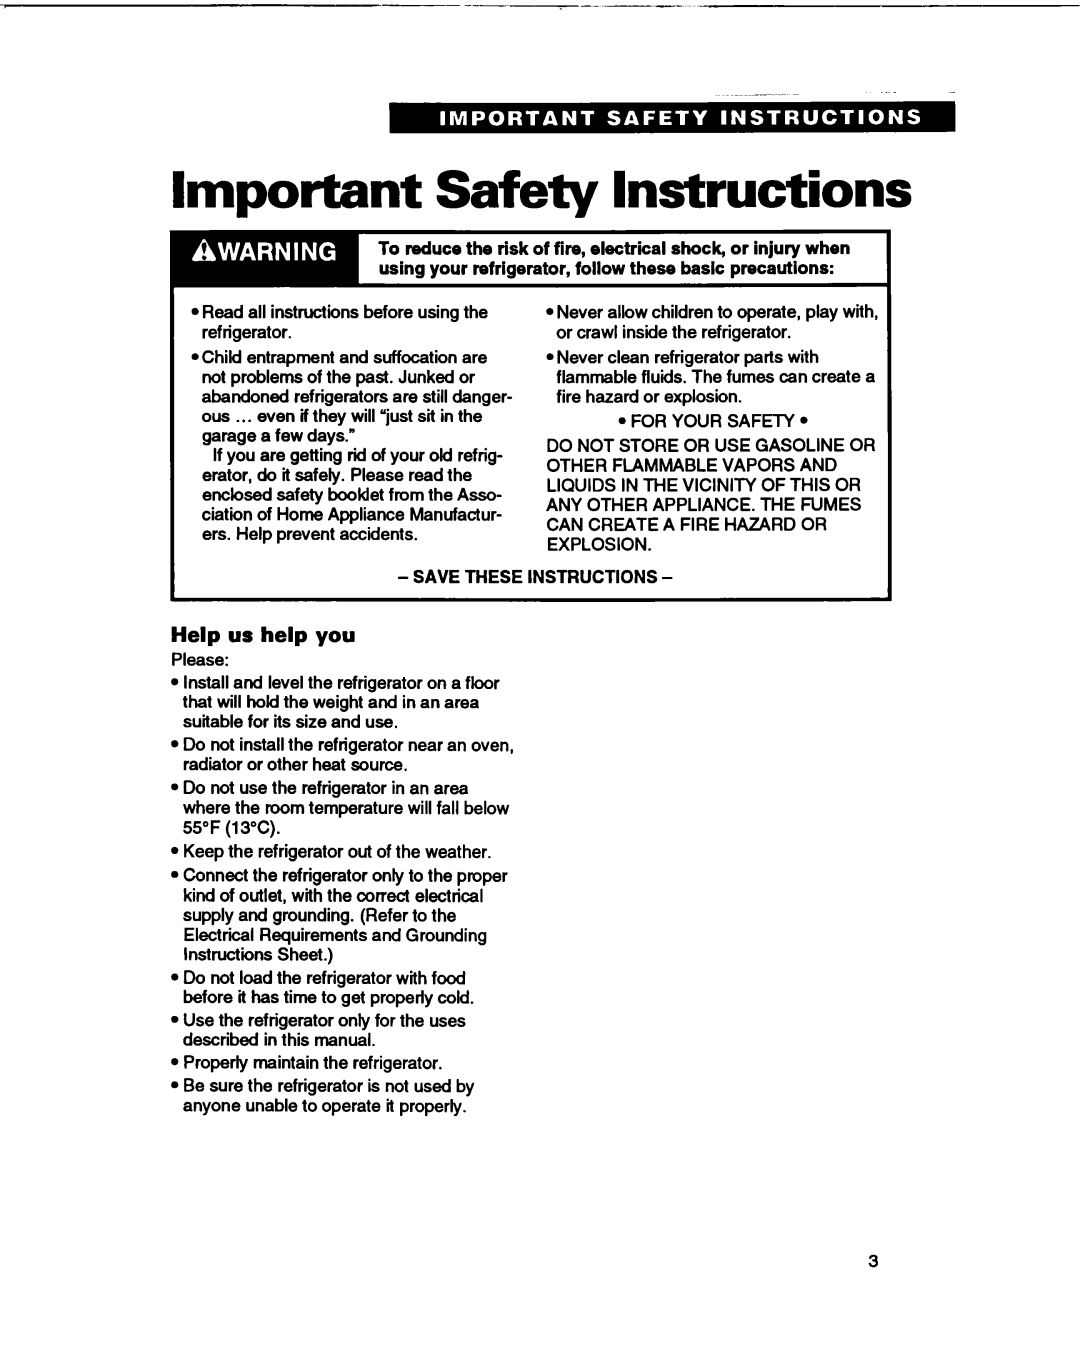 Whirlpool B2lDK important safety instructions Important Safety Instructions, Help us help you, Save These Instructions 